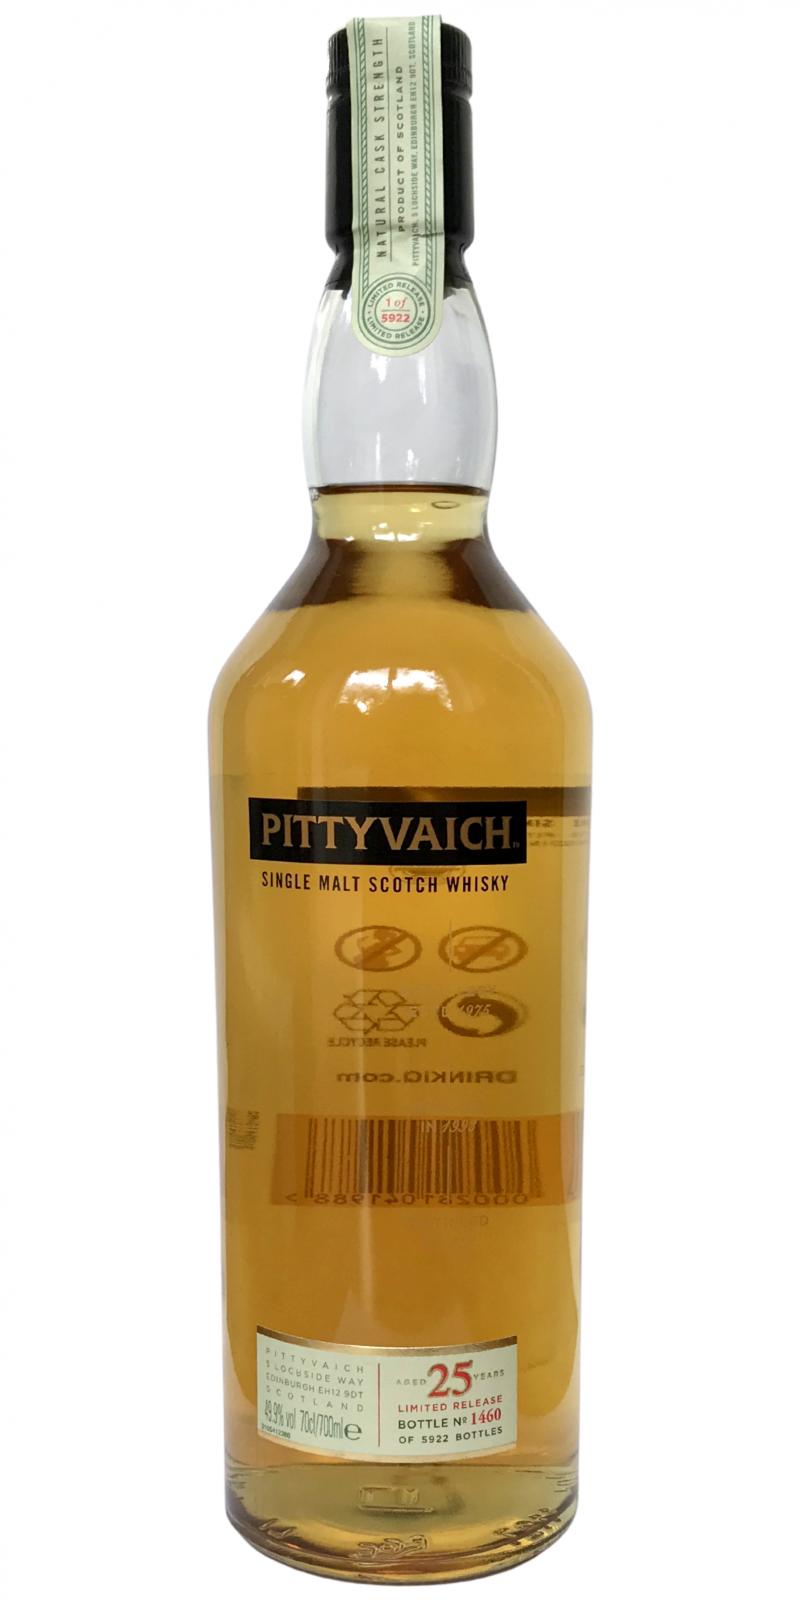 Pittyvaich 1989 - Ratings and reviews - Whiskybase